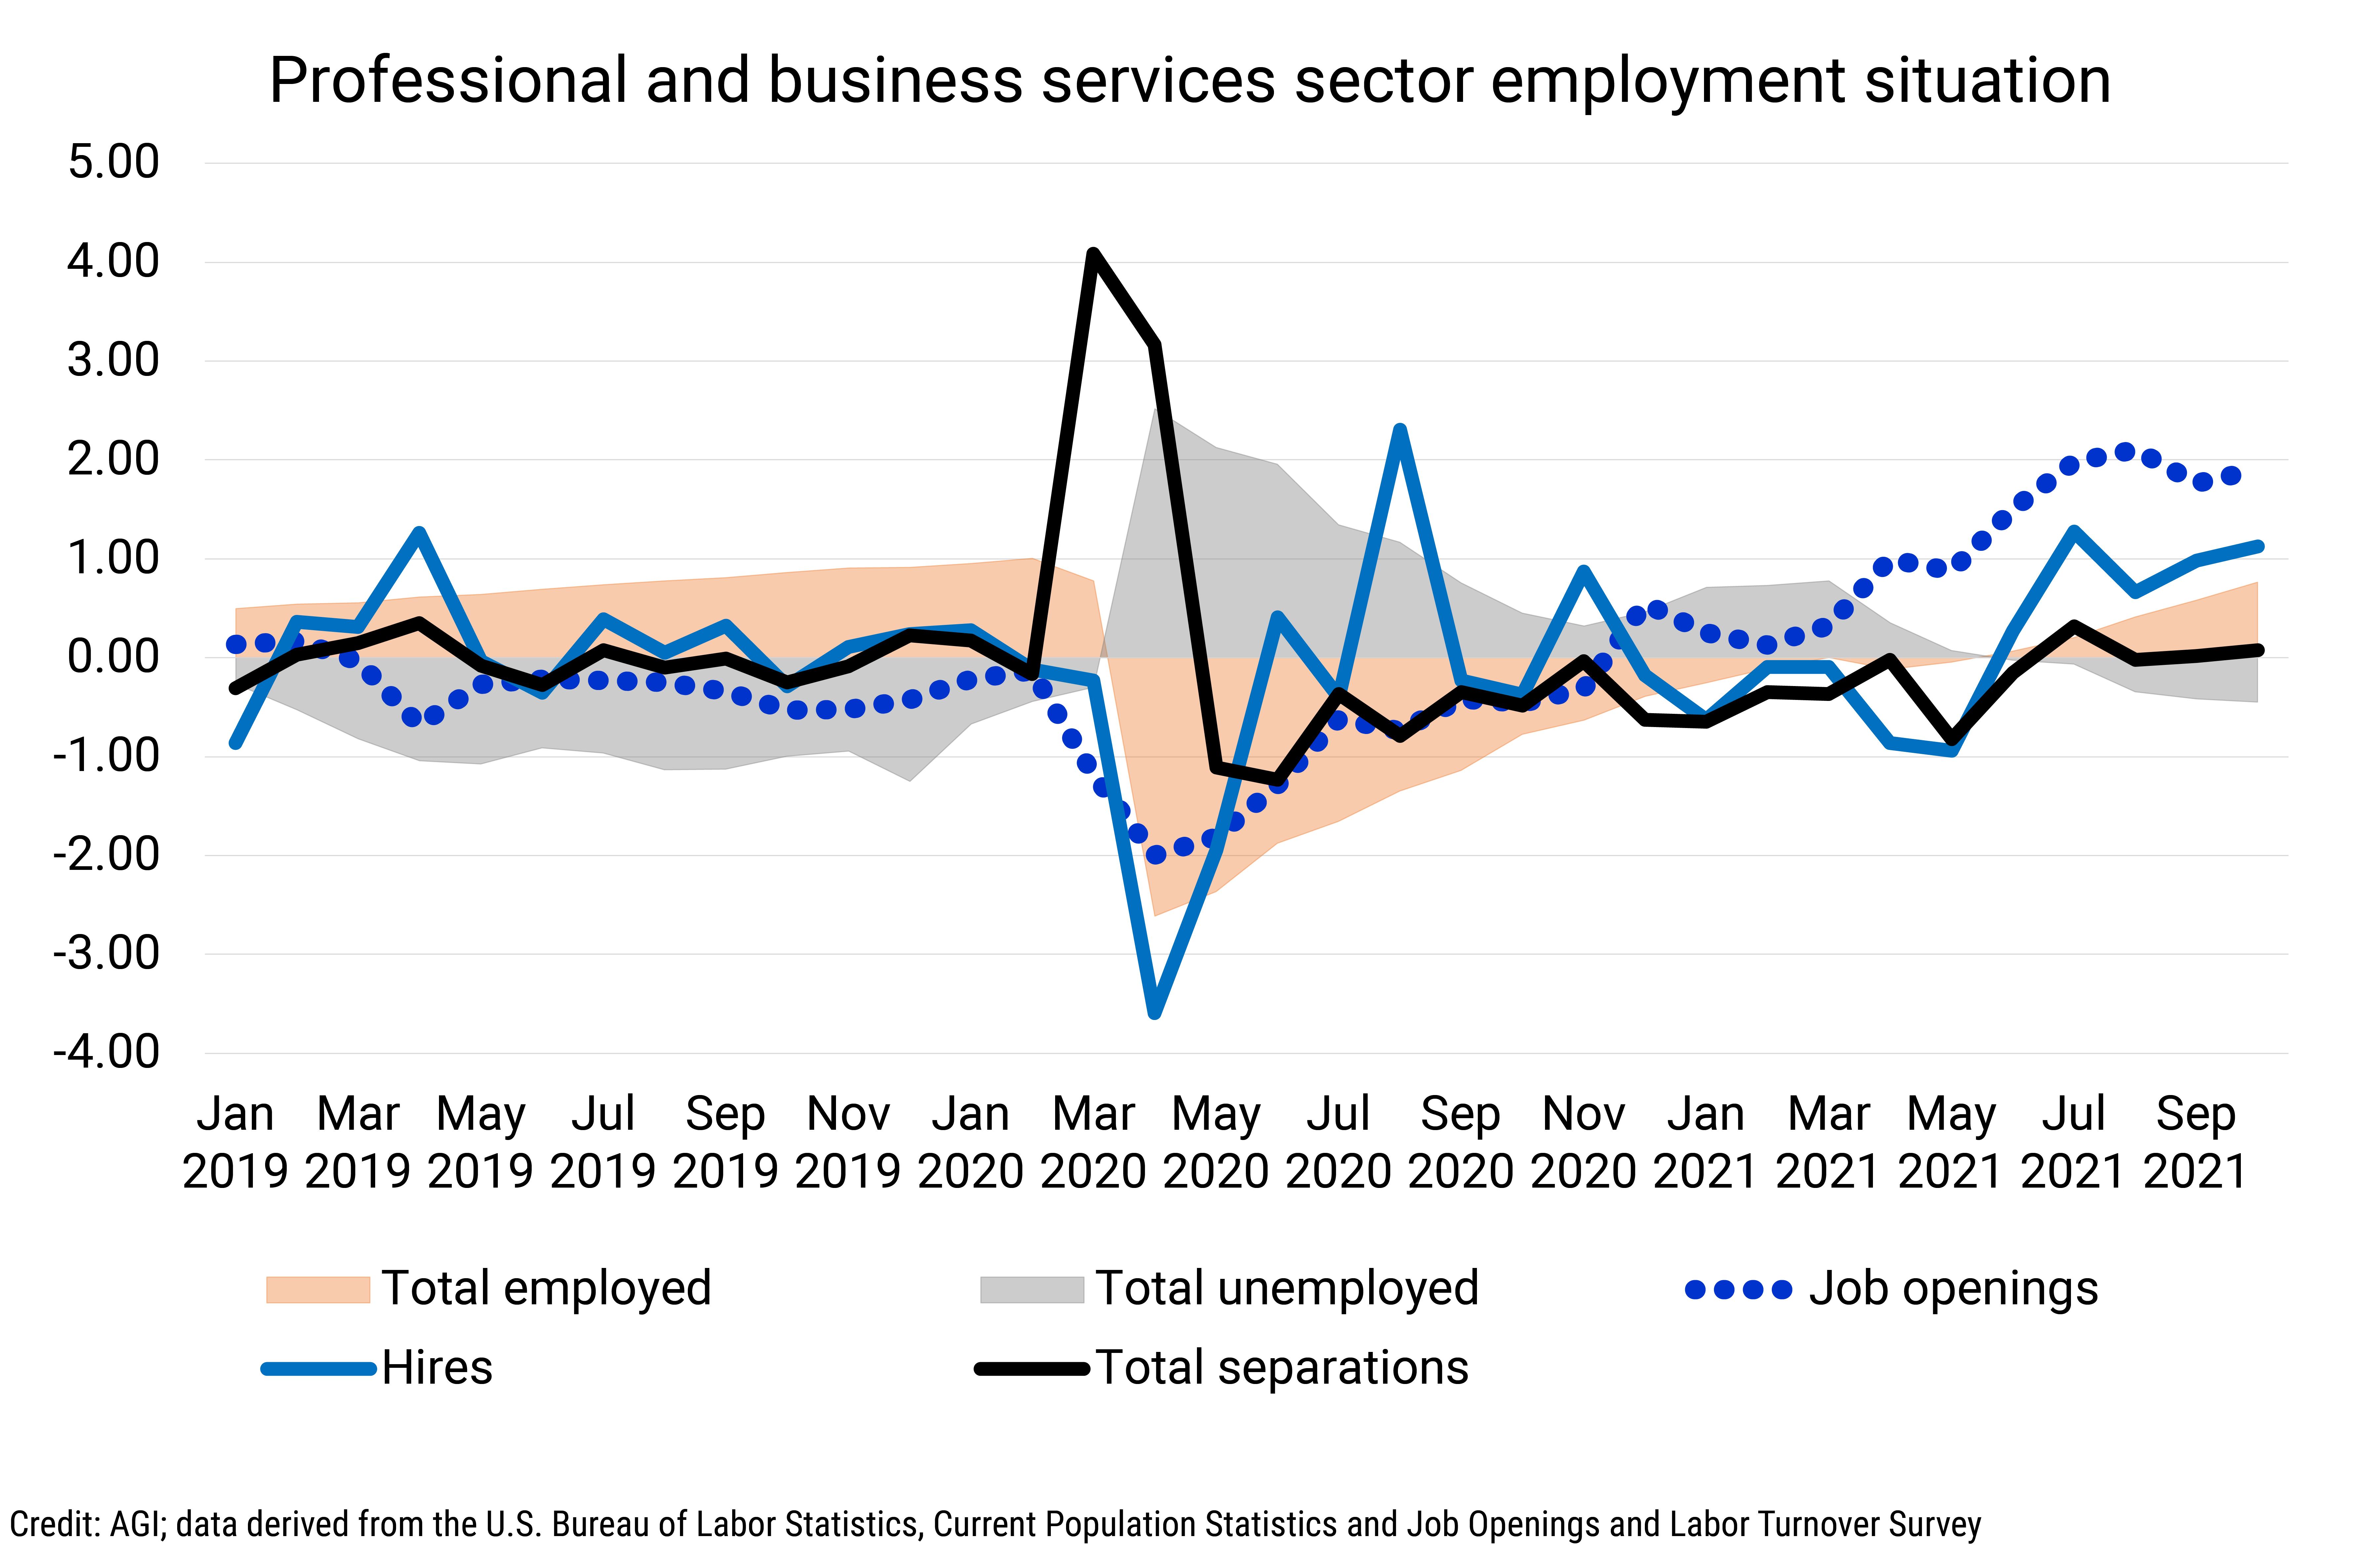 DB_2022-001 chart 08: Professional and business services sector employment situation (Credit: AGI; data derived from the U.S. Bureau of Labor Statistics, Current Population Statistics and Job Openings and Labor Turnover Survey)